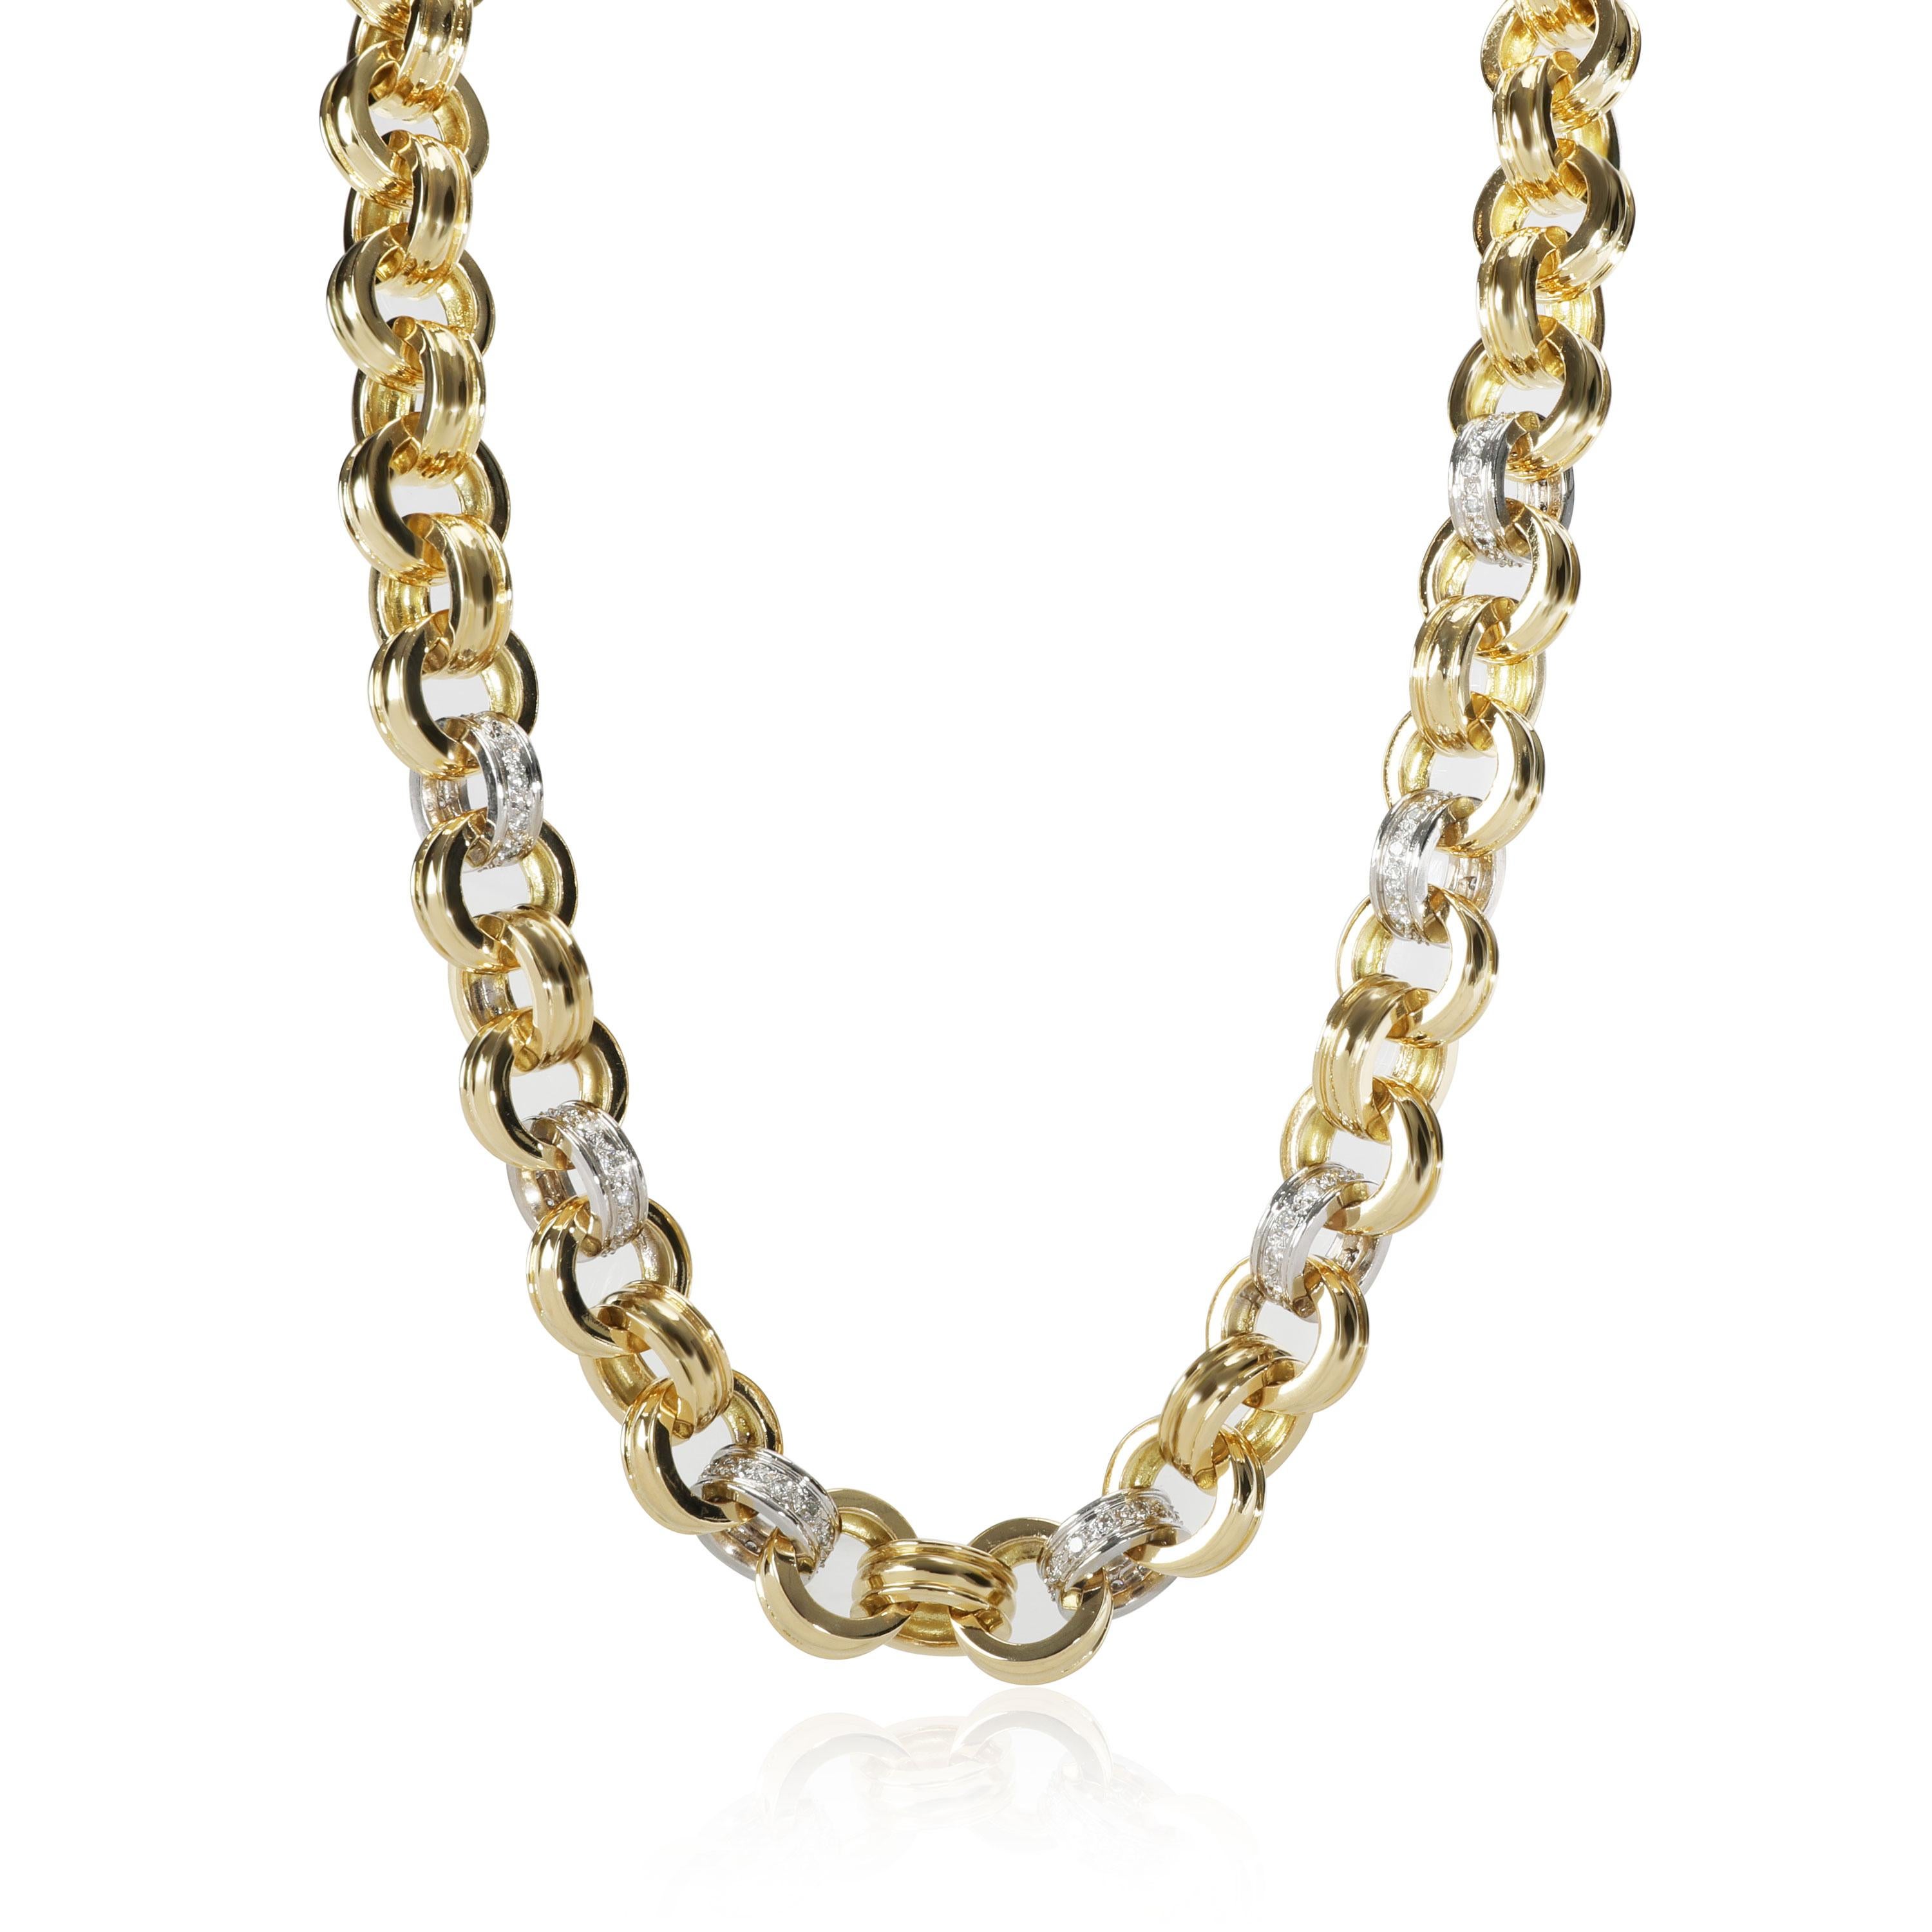 Modern Theo Fennell Diamond Link Necklace in 18k 2 Tone Gold 2.52 CTW